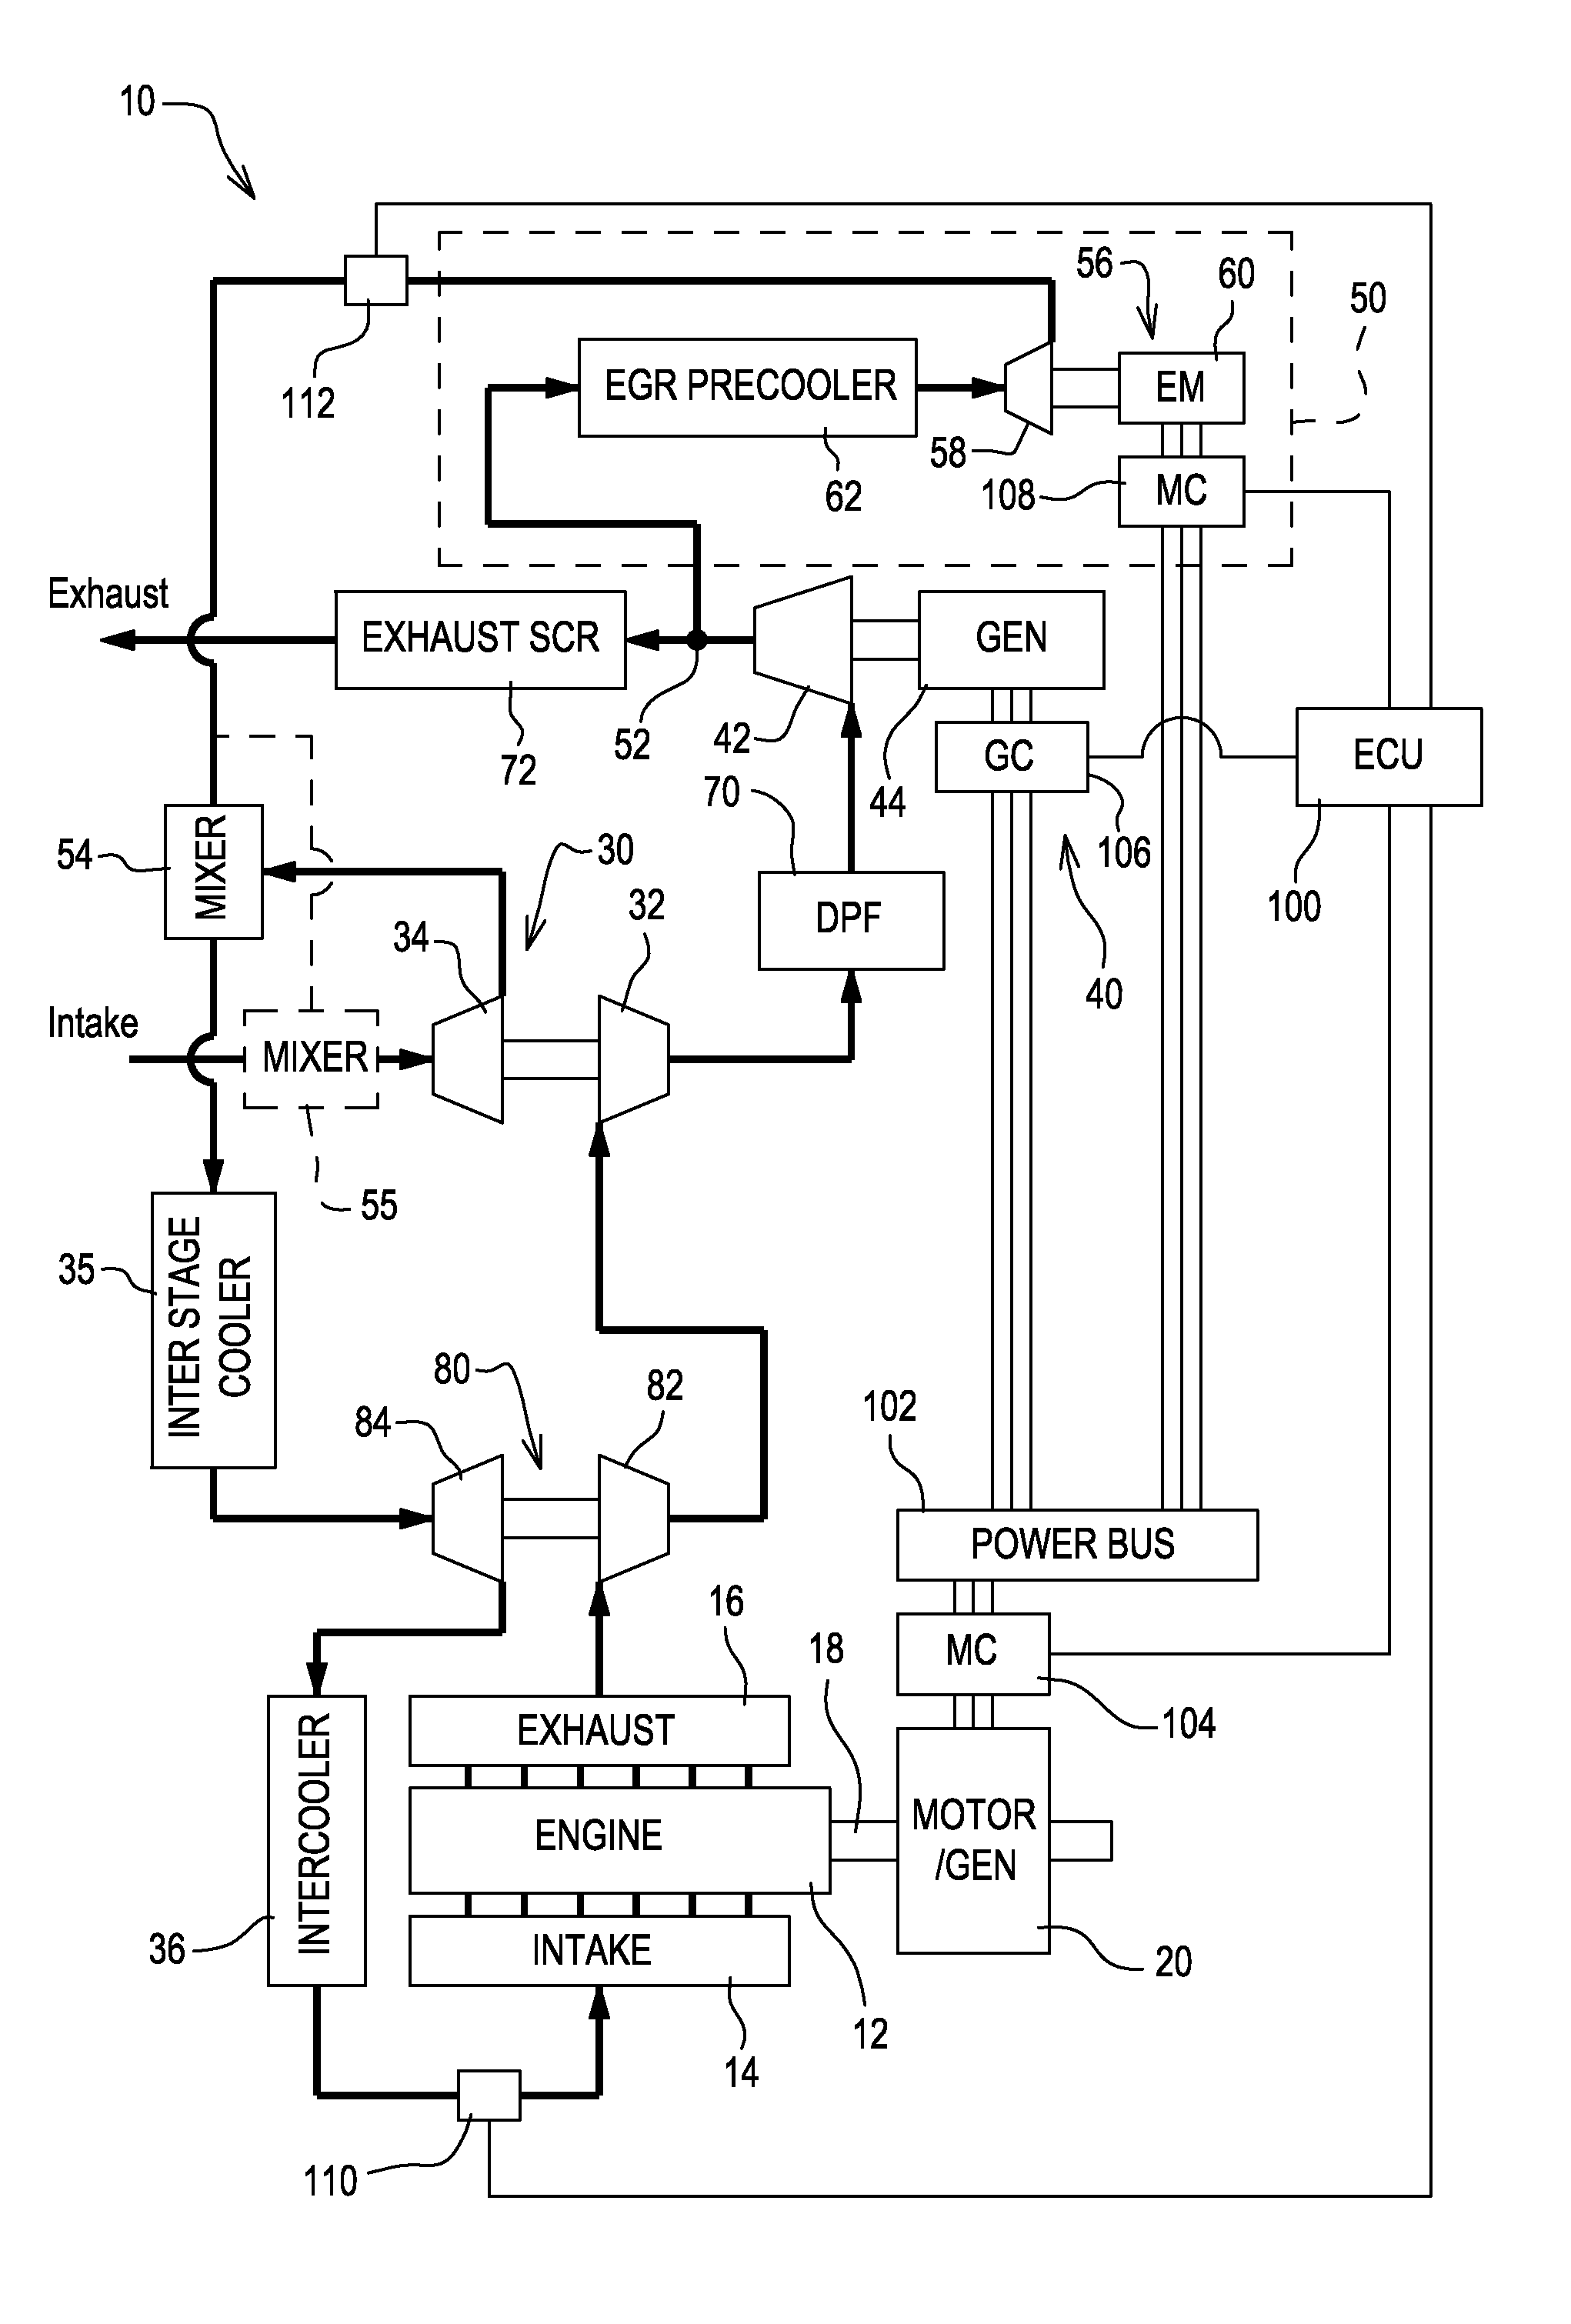 Metering exhaust gas recirculation system for a dual turbocharged engine having a turbogenerator system